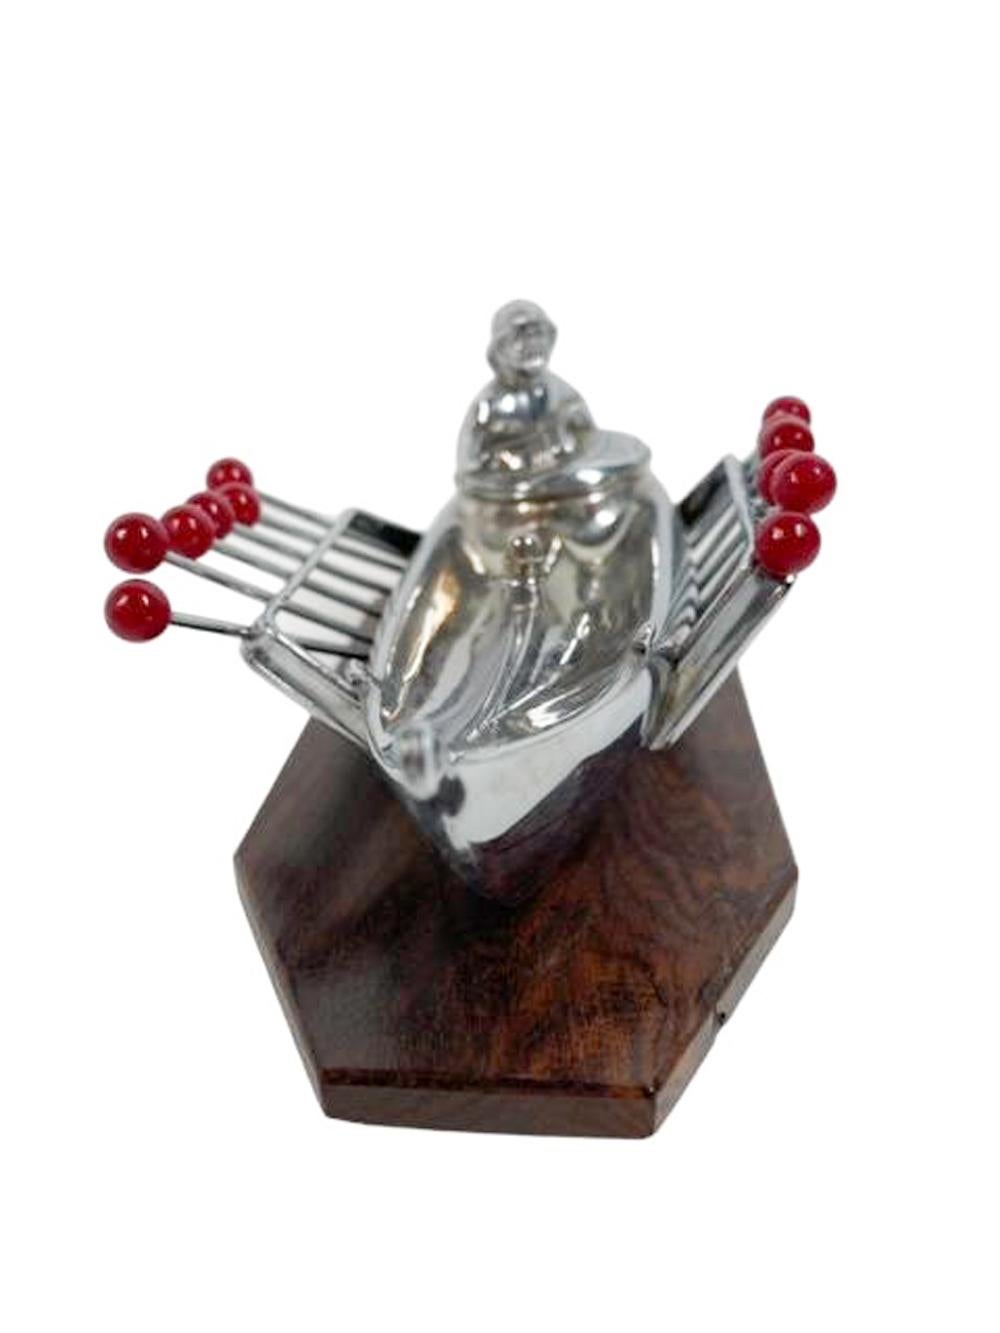 Art Deco chromed figure of a fisherman in a dory wearing foul weather gear set on a wood base and with a pierced rail to each side holding 12 red ball topped picks with forked tips.